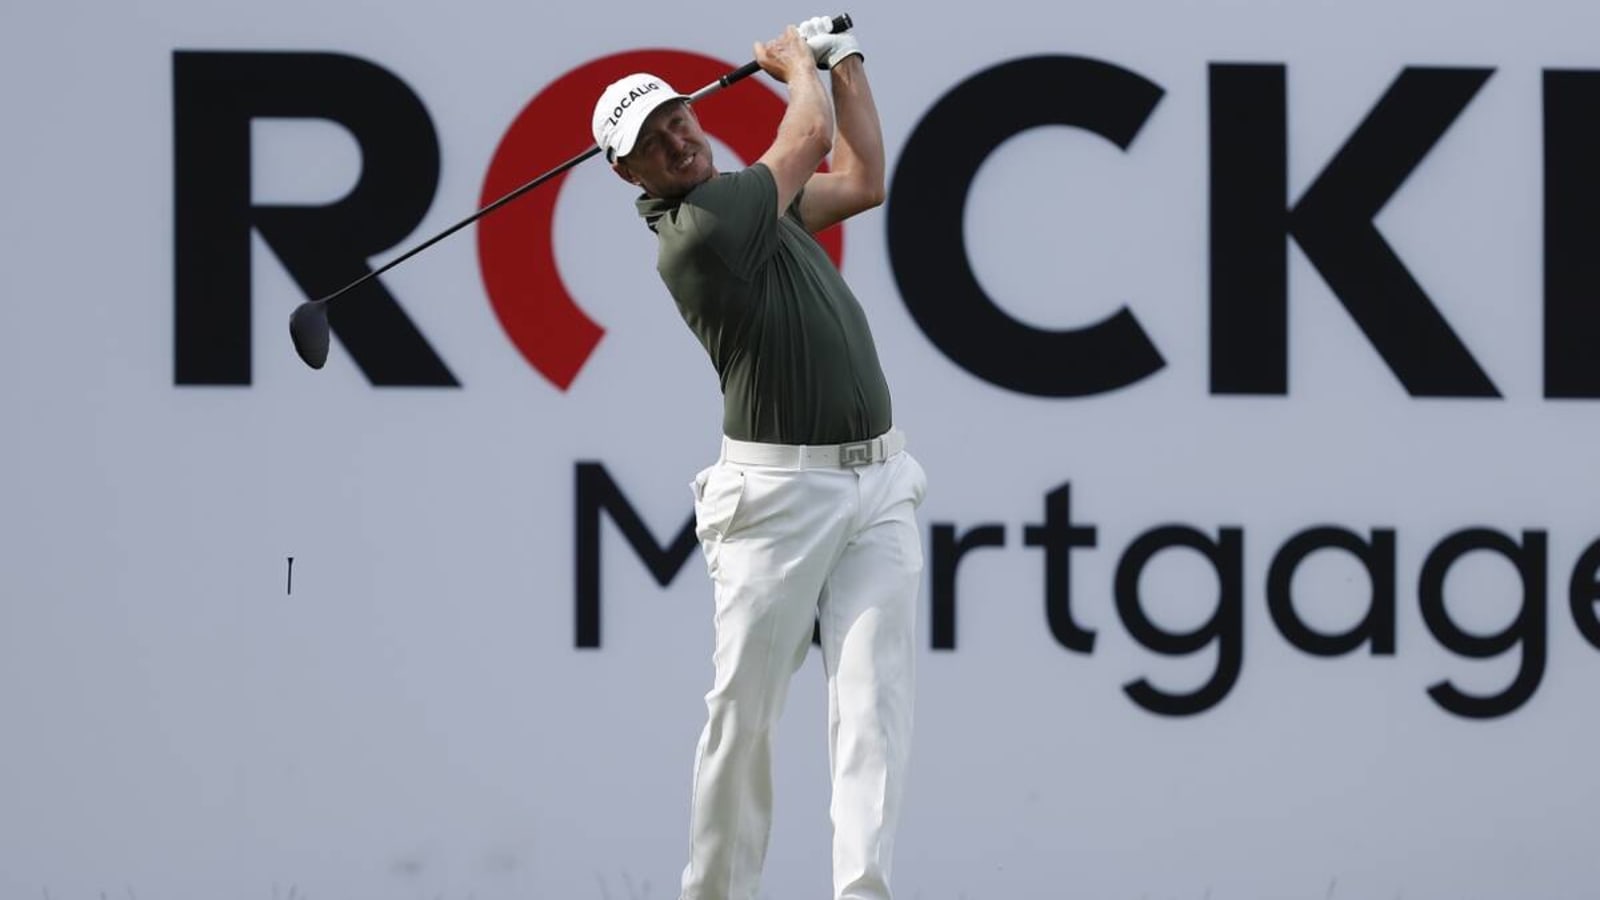 Jonas Blixt at the Mexico Open Live: TV Channel & Streaming Online